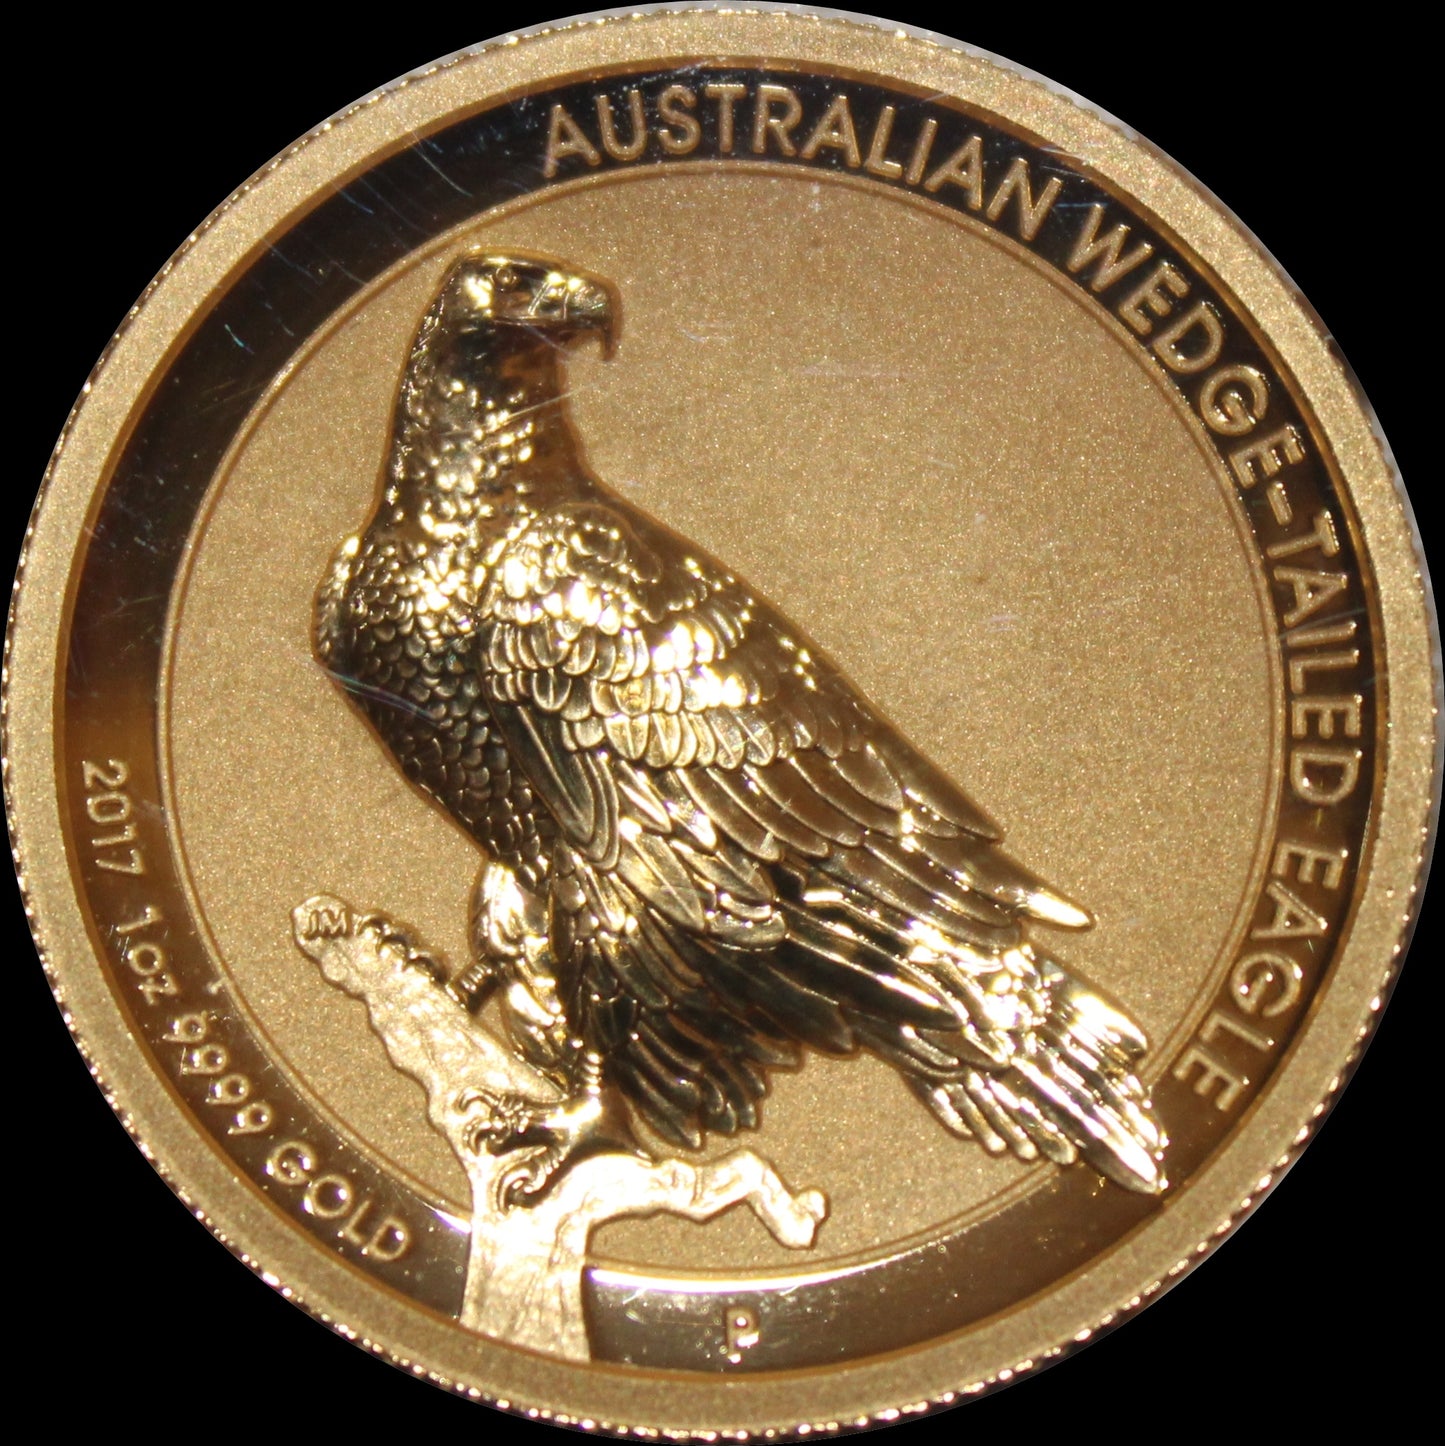 Wedge Tailed Eagle 2017, Series 1 oz Gold Wedge Tailed Eagle Proof PF70 $100, 2017